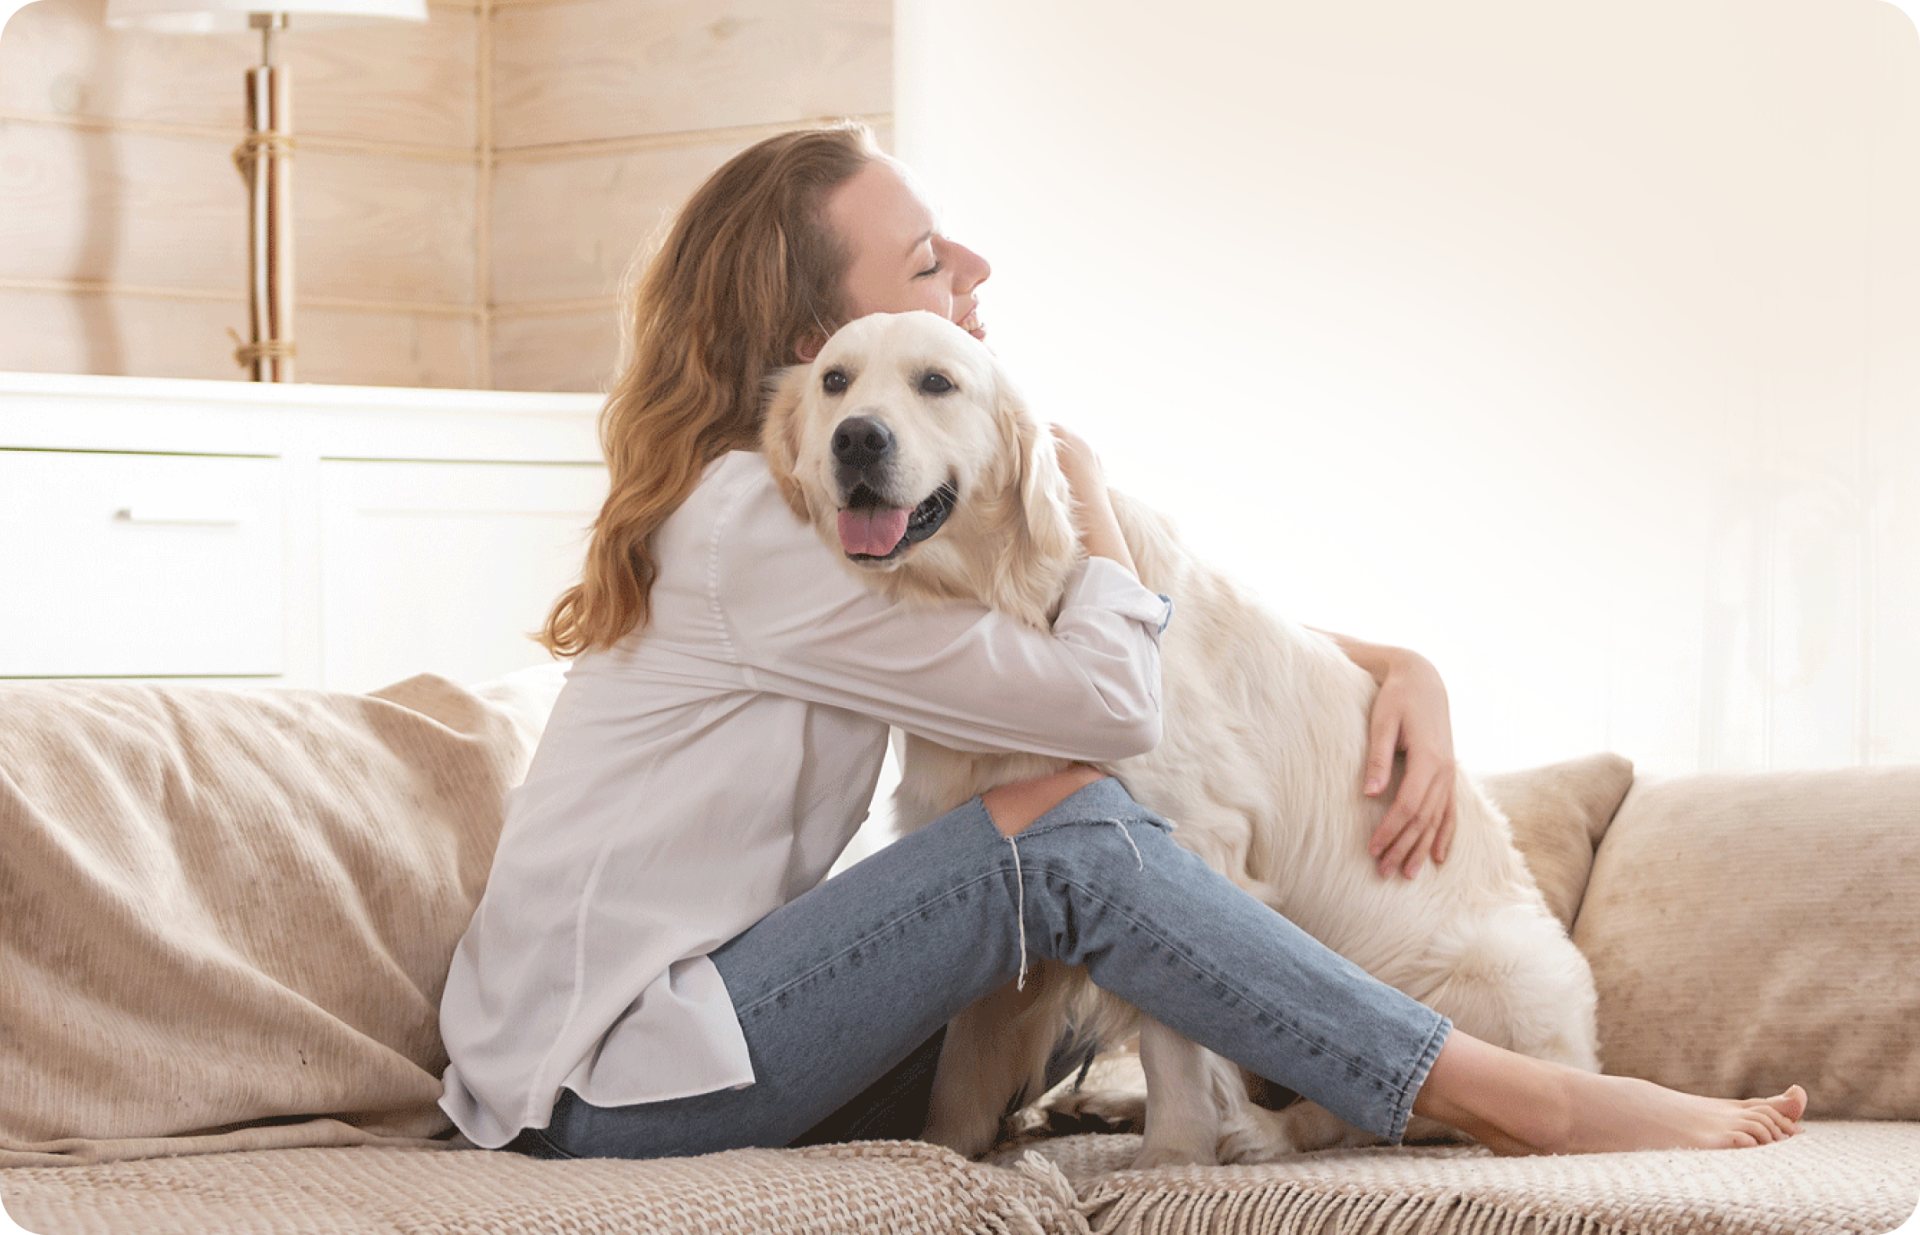 Dog being hugged by a woman on a couch